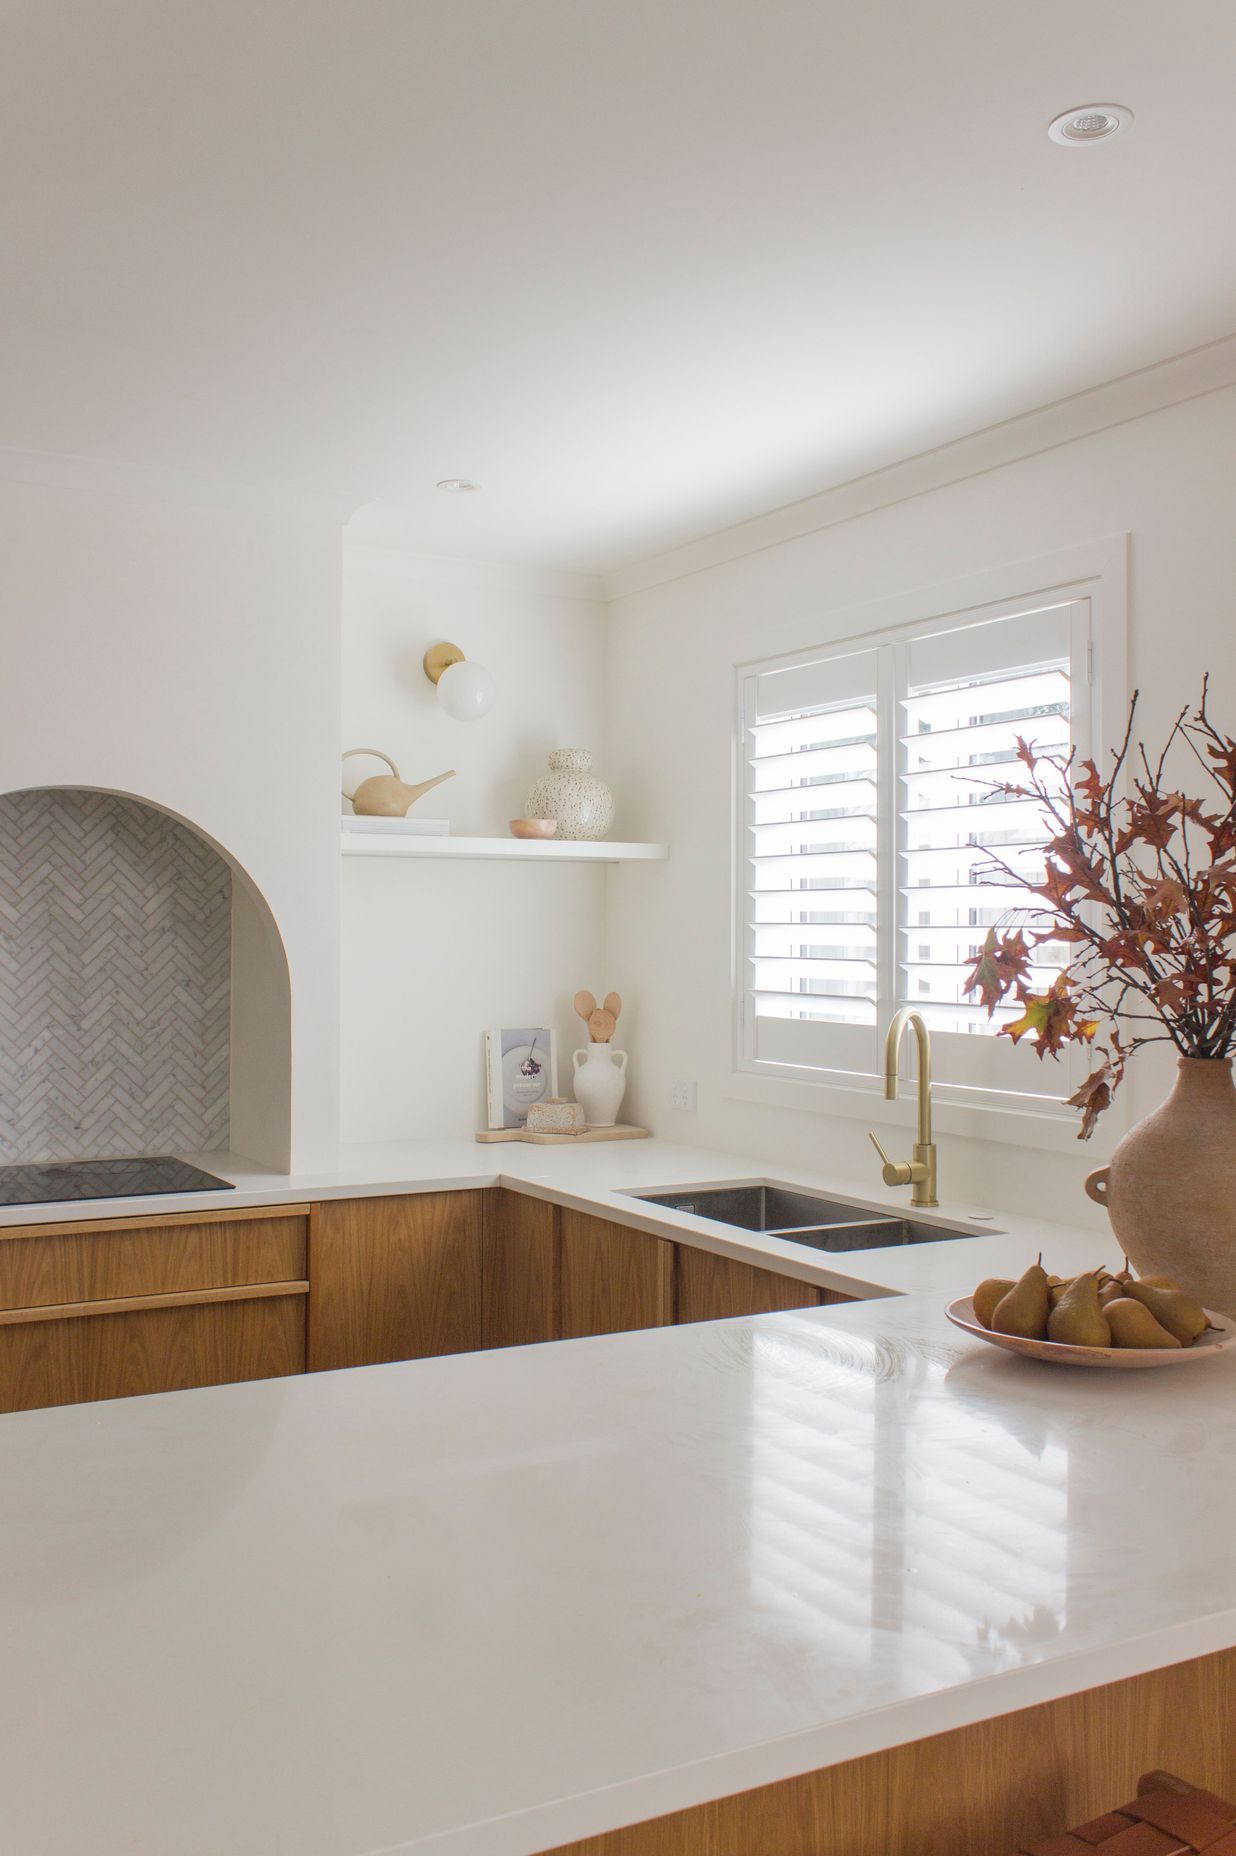 "The arched rangehood was an original design and was in response to some of the space limitations I had to work within."